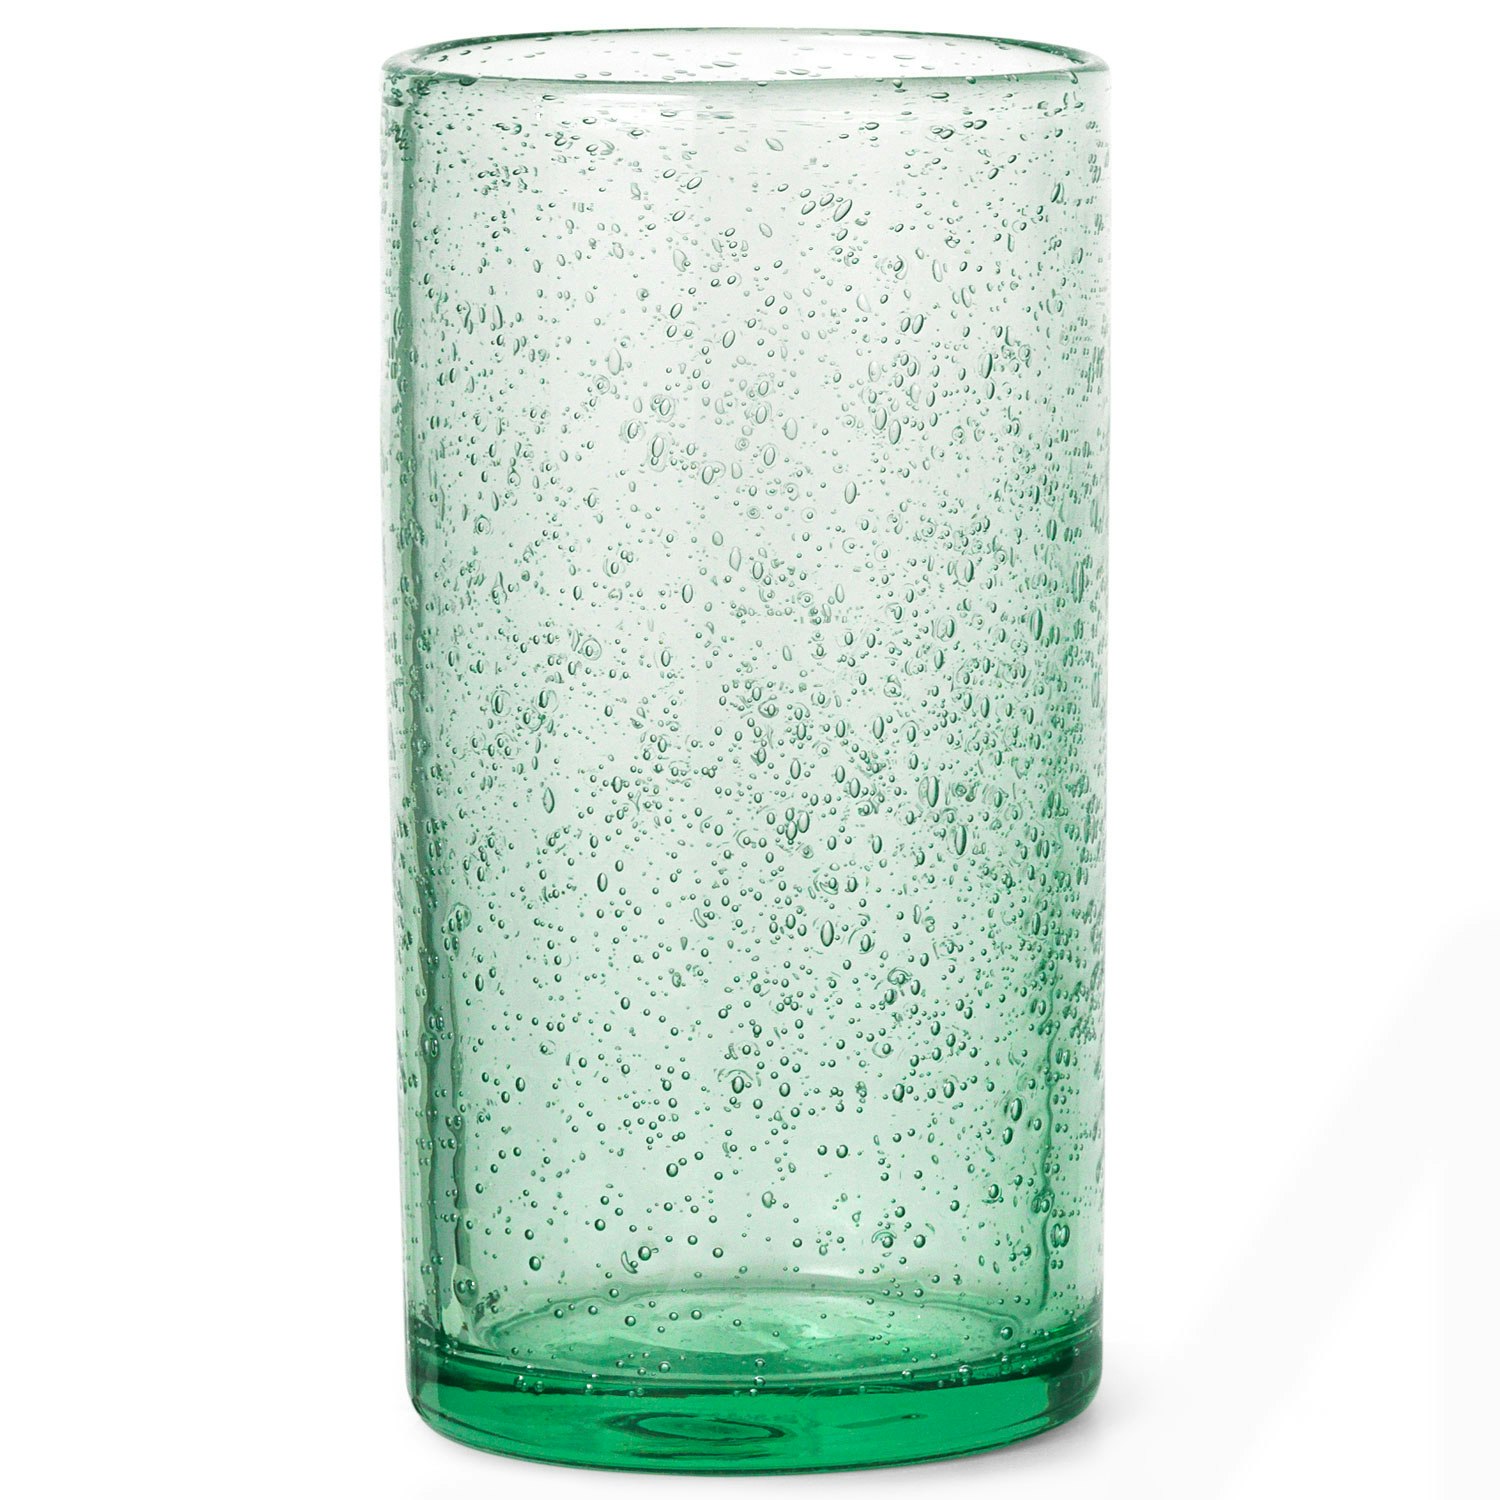 https://royaldesign.com/image/11/ferm-living-oli-water-glass-tall-recycled-clear-0